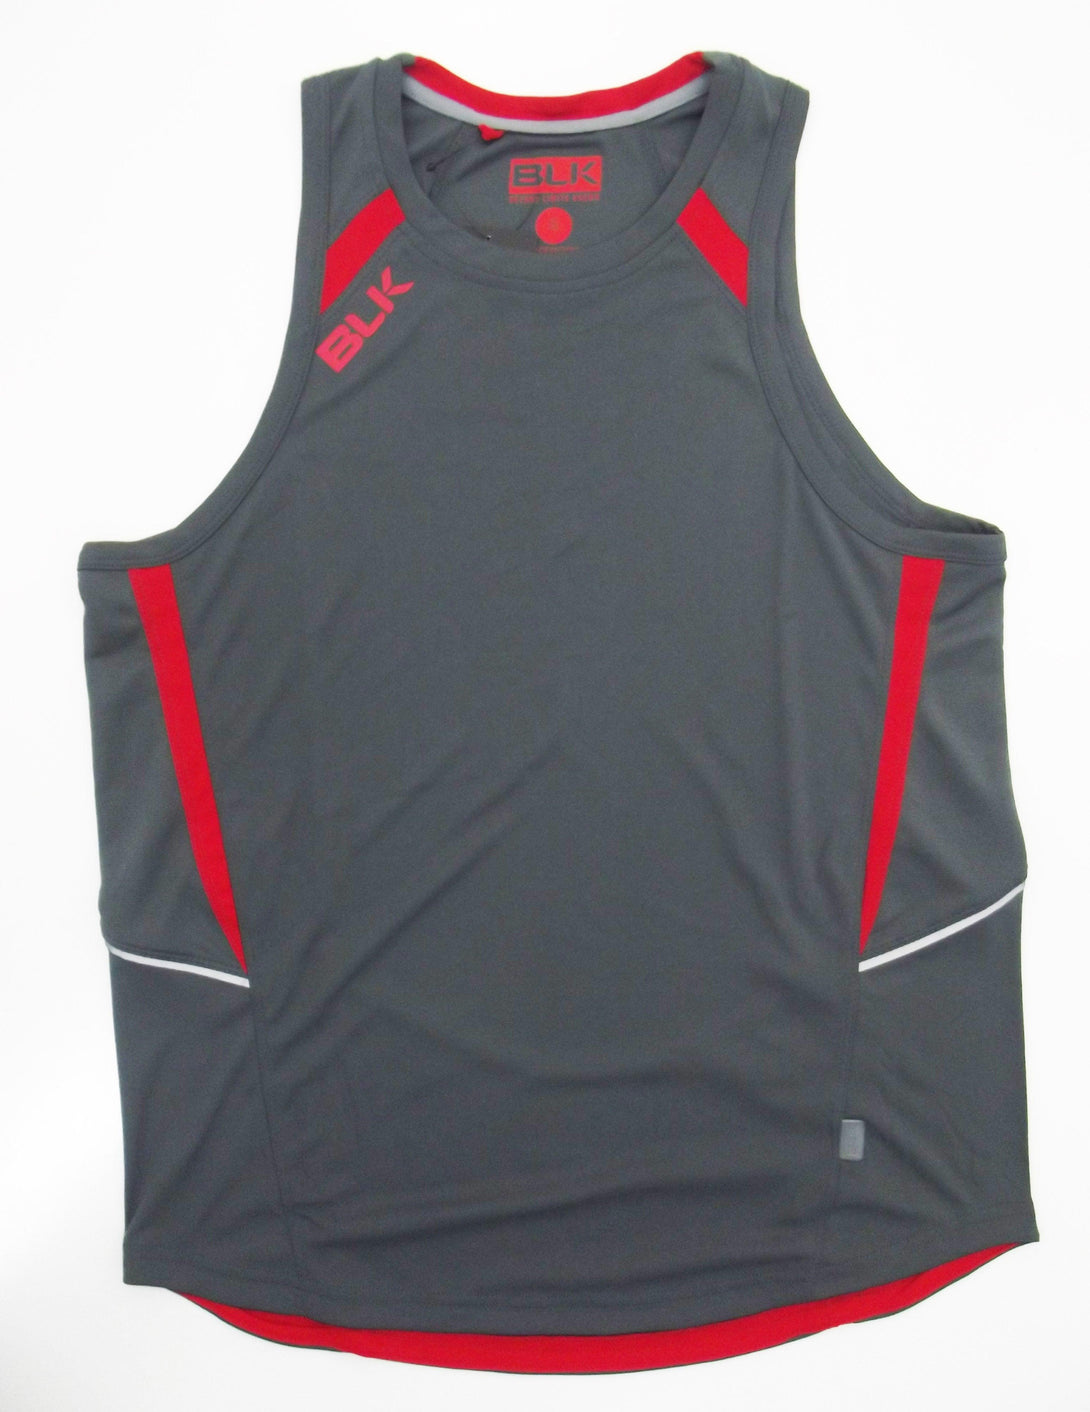 Rugby Heaven Blk Vapour Performance Adults Charcoal Singlet - www.rugby-heaven.co.uk